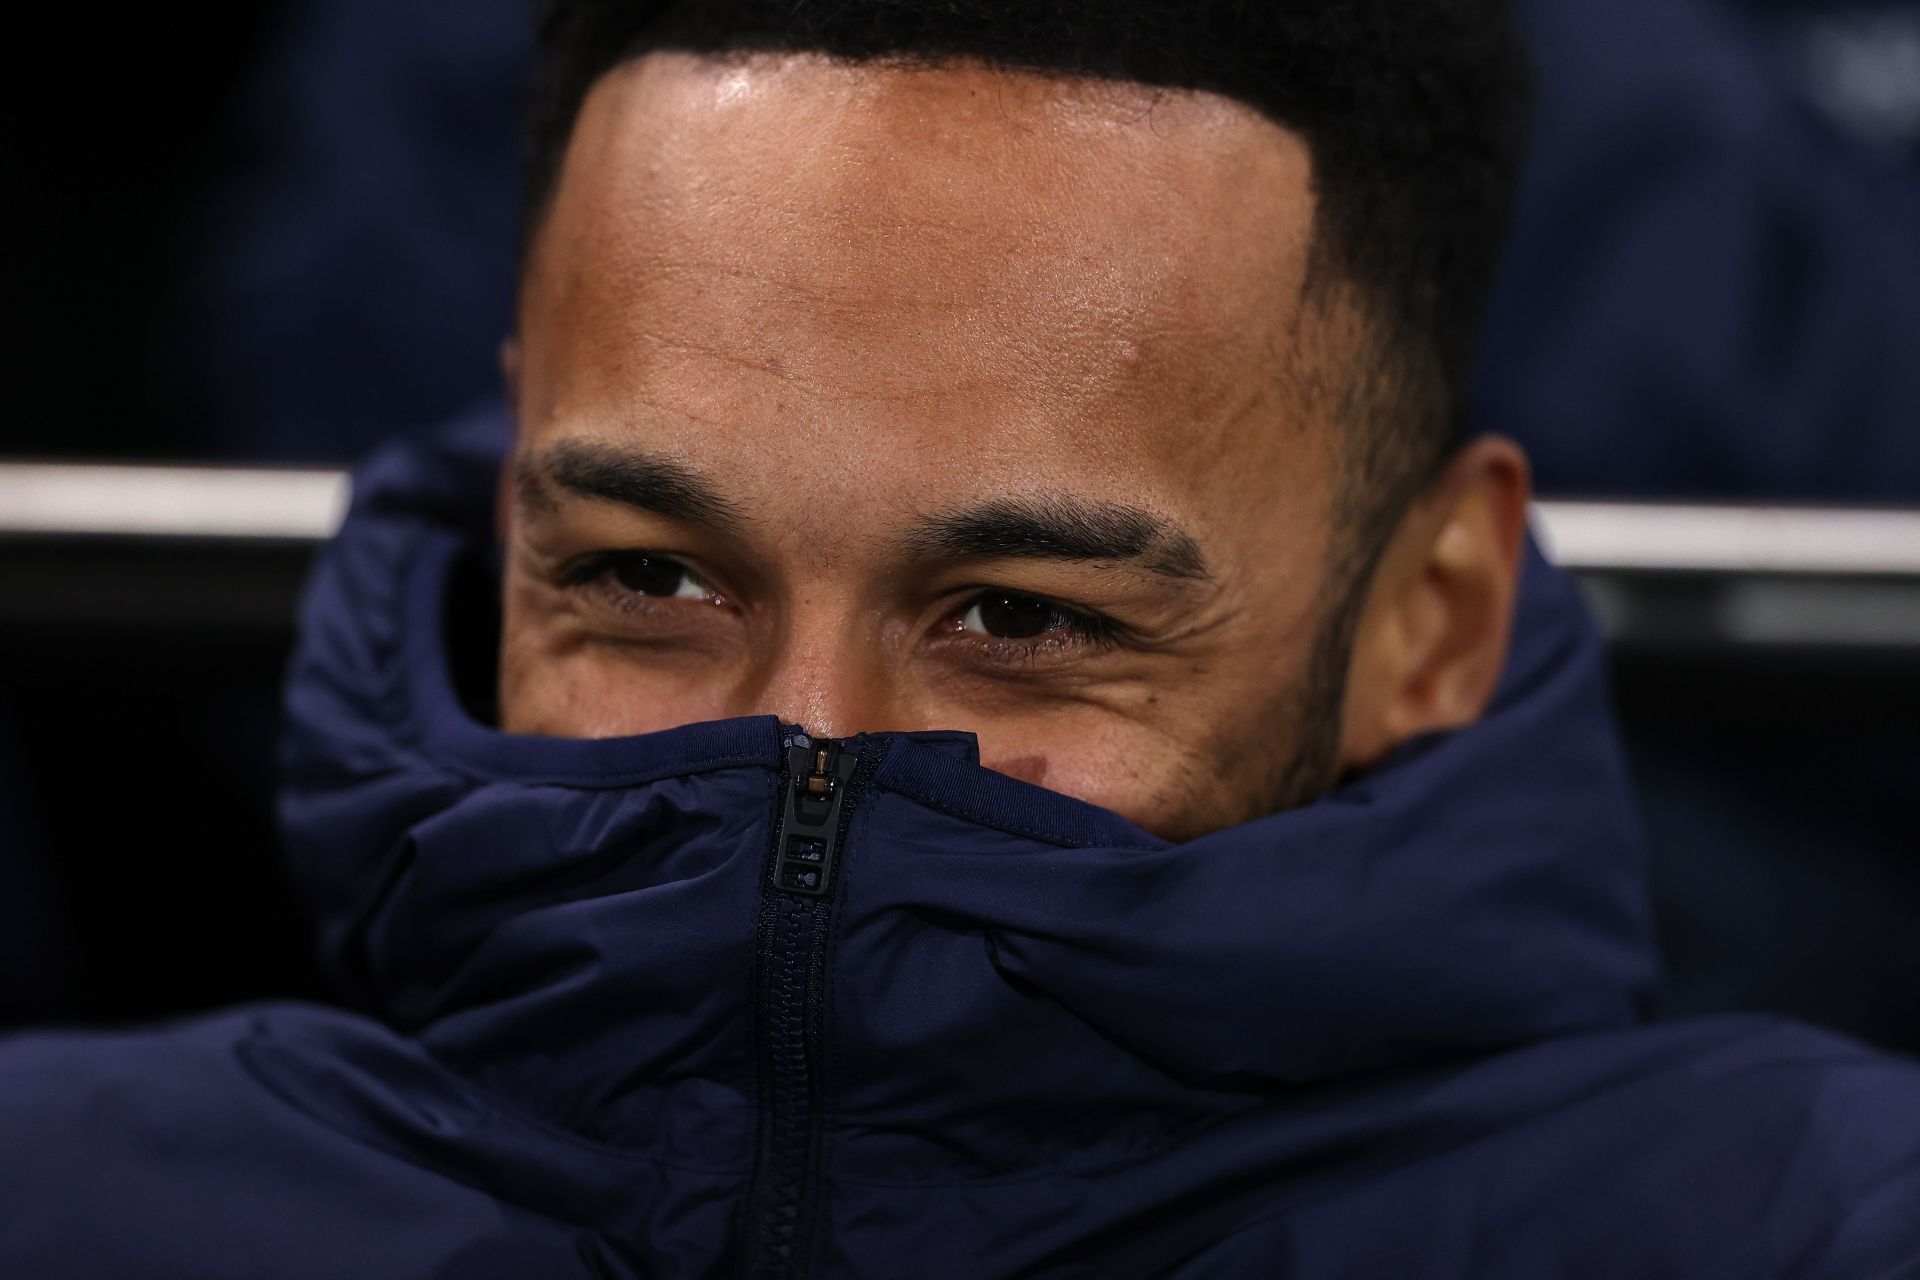 Pierre-Emerick Aubameyang has endured a difficult time with Chelsea this season.